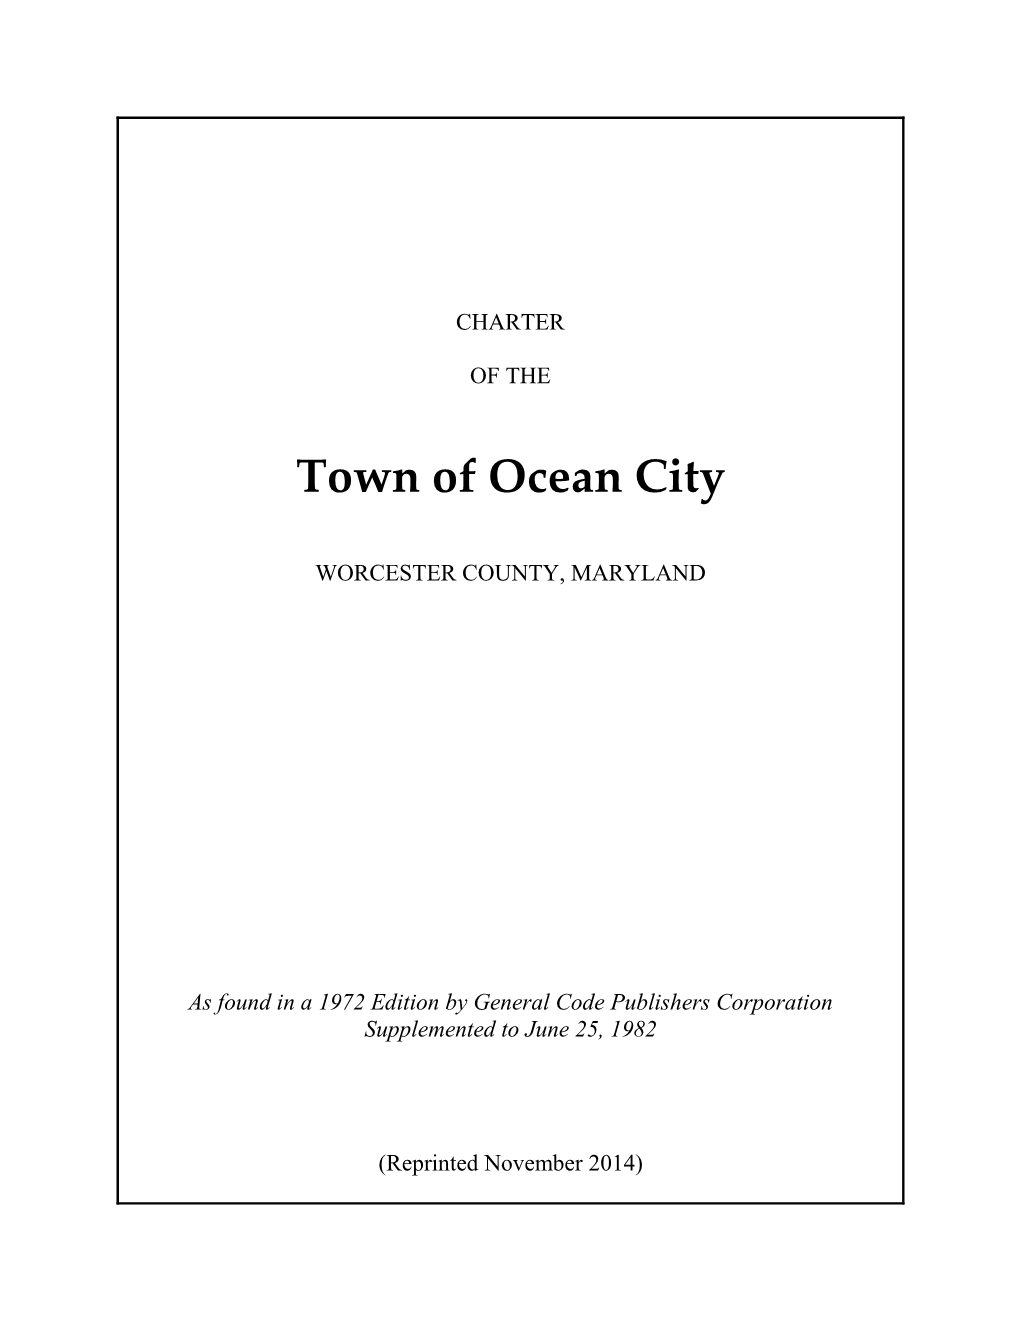 Charter of the Town of Ocean City 110 - Iii